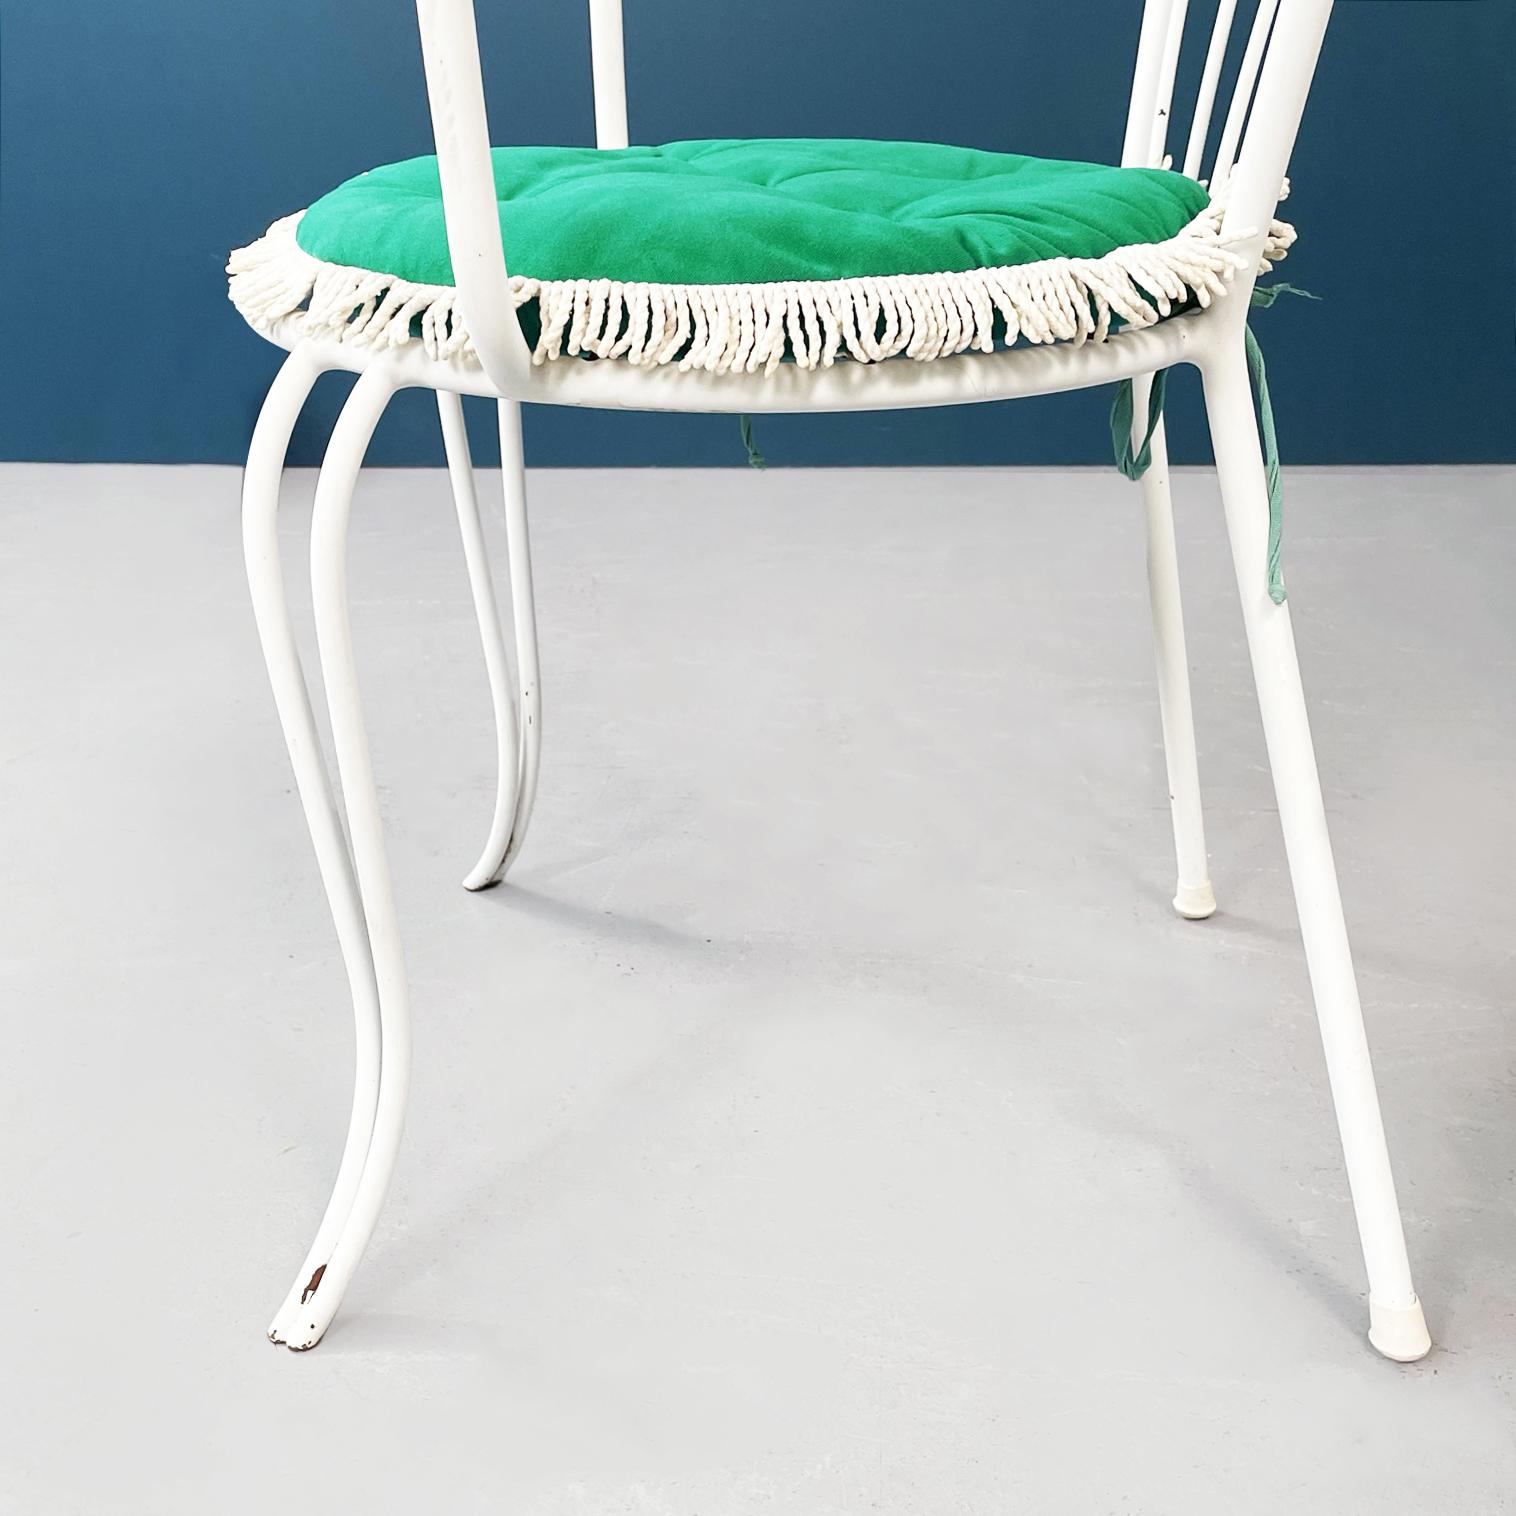 Italian Mid-Century Garden Chairs in White Wrought Iron and Green Fabric, 1960s For Sale 8